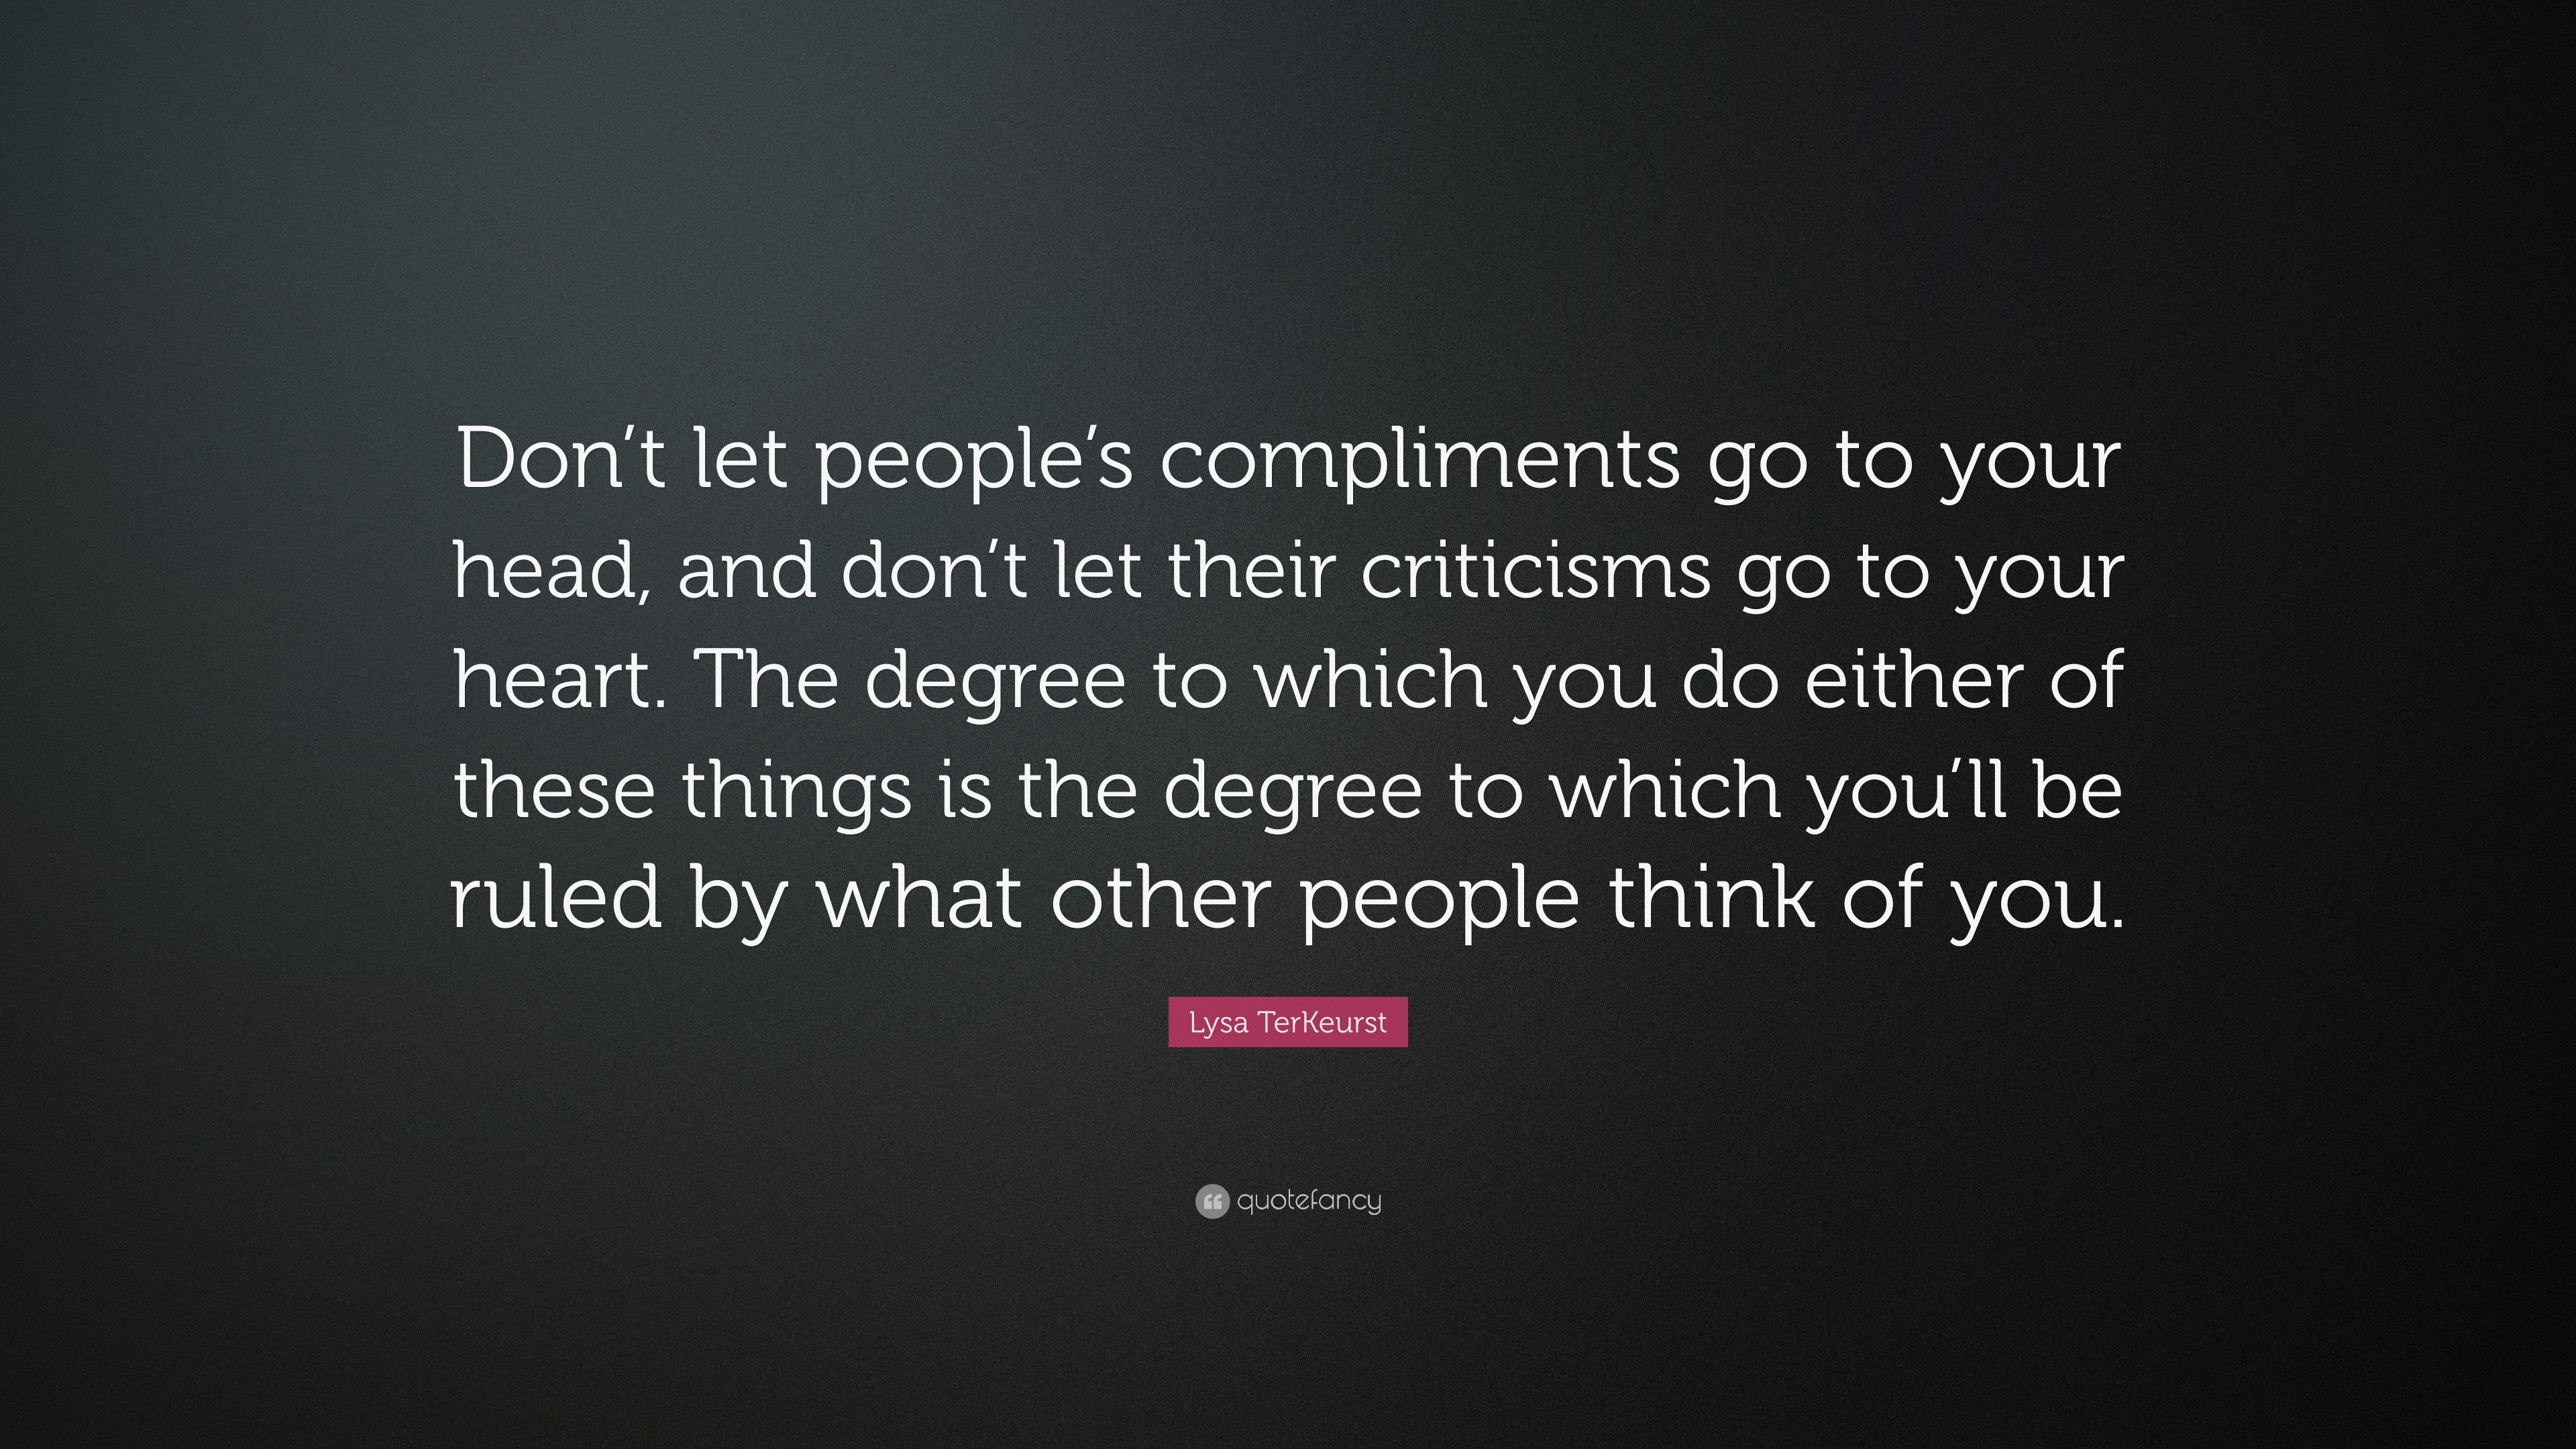 Lysa Terkeurst Quote Don T Let People S Compliments Go To Your Head And Don T Let Their Criticisms Go To Your Heart The Degree To Which You 12 Wallpapers Quotefancy